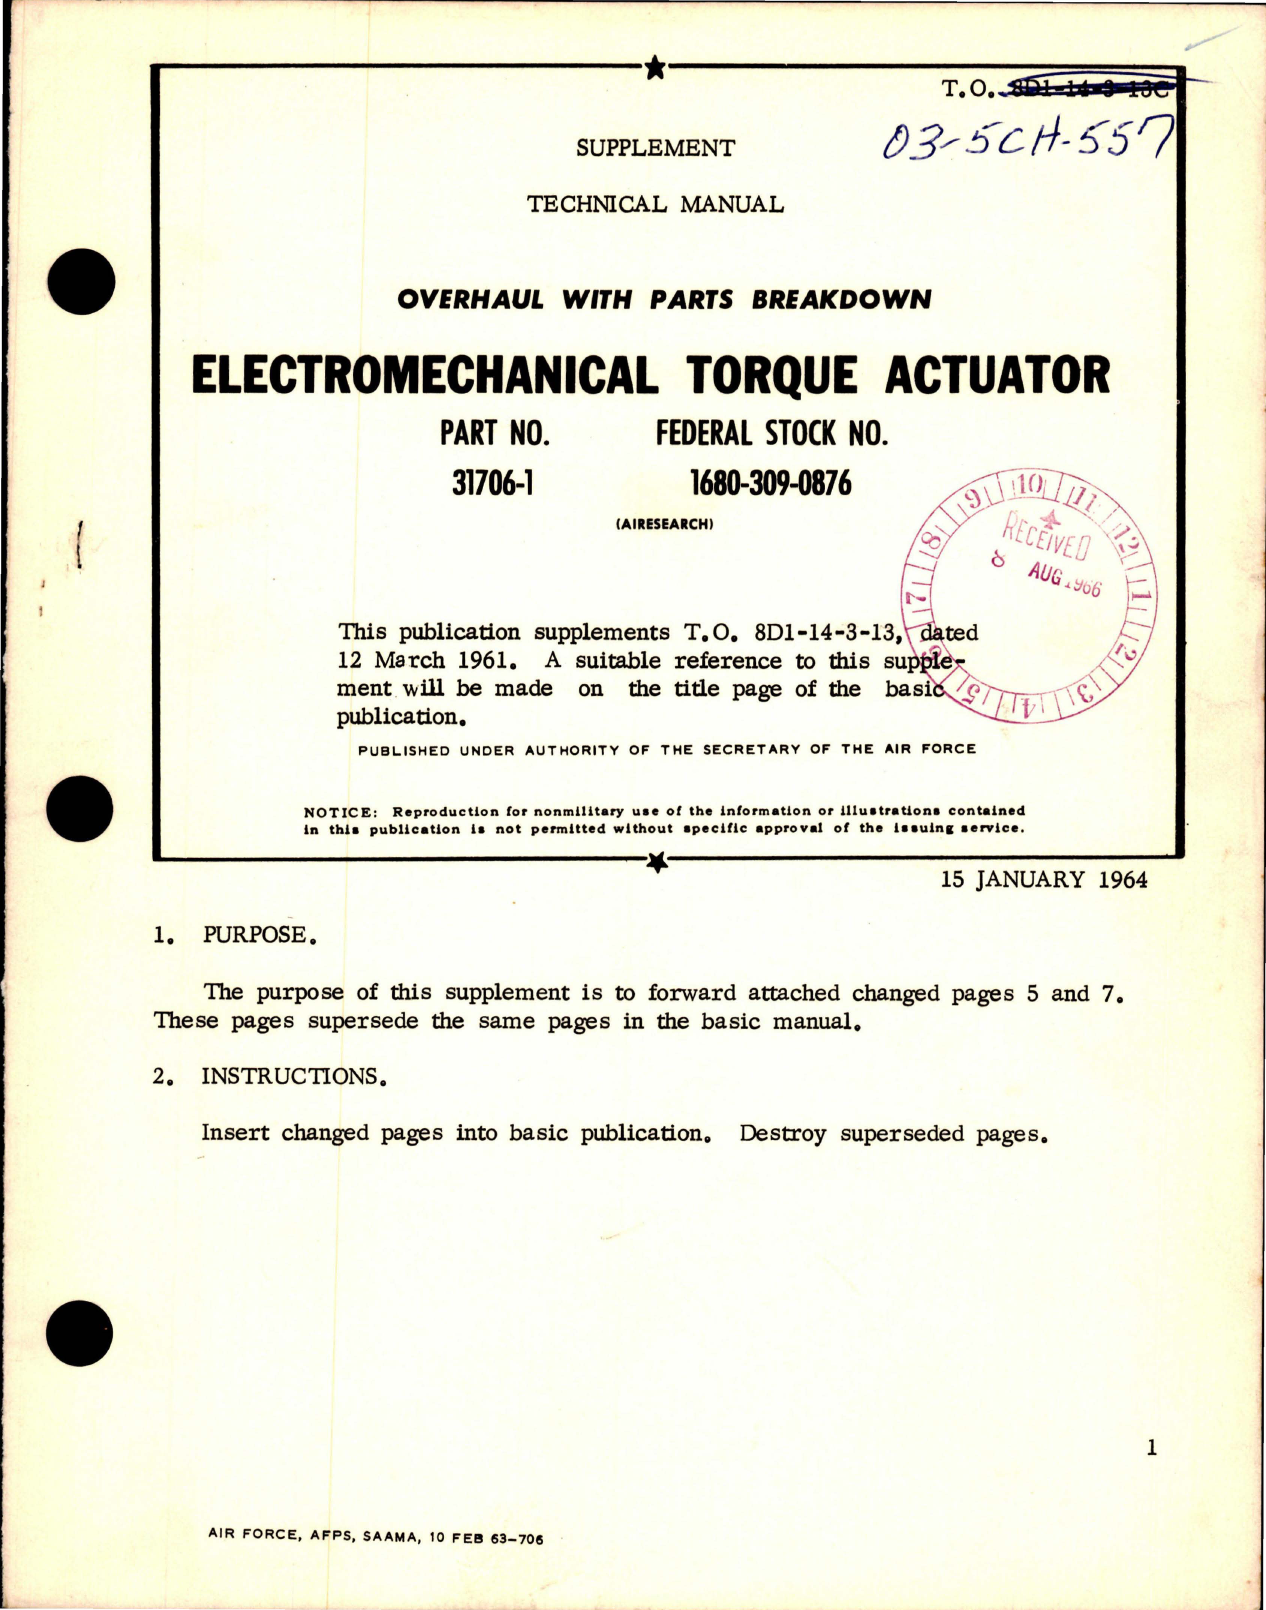 Sample page 1 from AirCorps Library document: Supplement to Overhaul with Parts Breakdown for Electromechanical Torque Actuator - Part 31706-1 